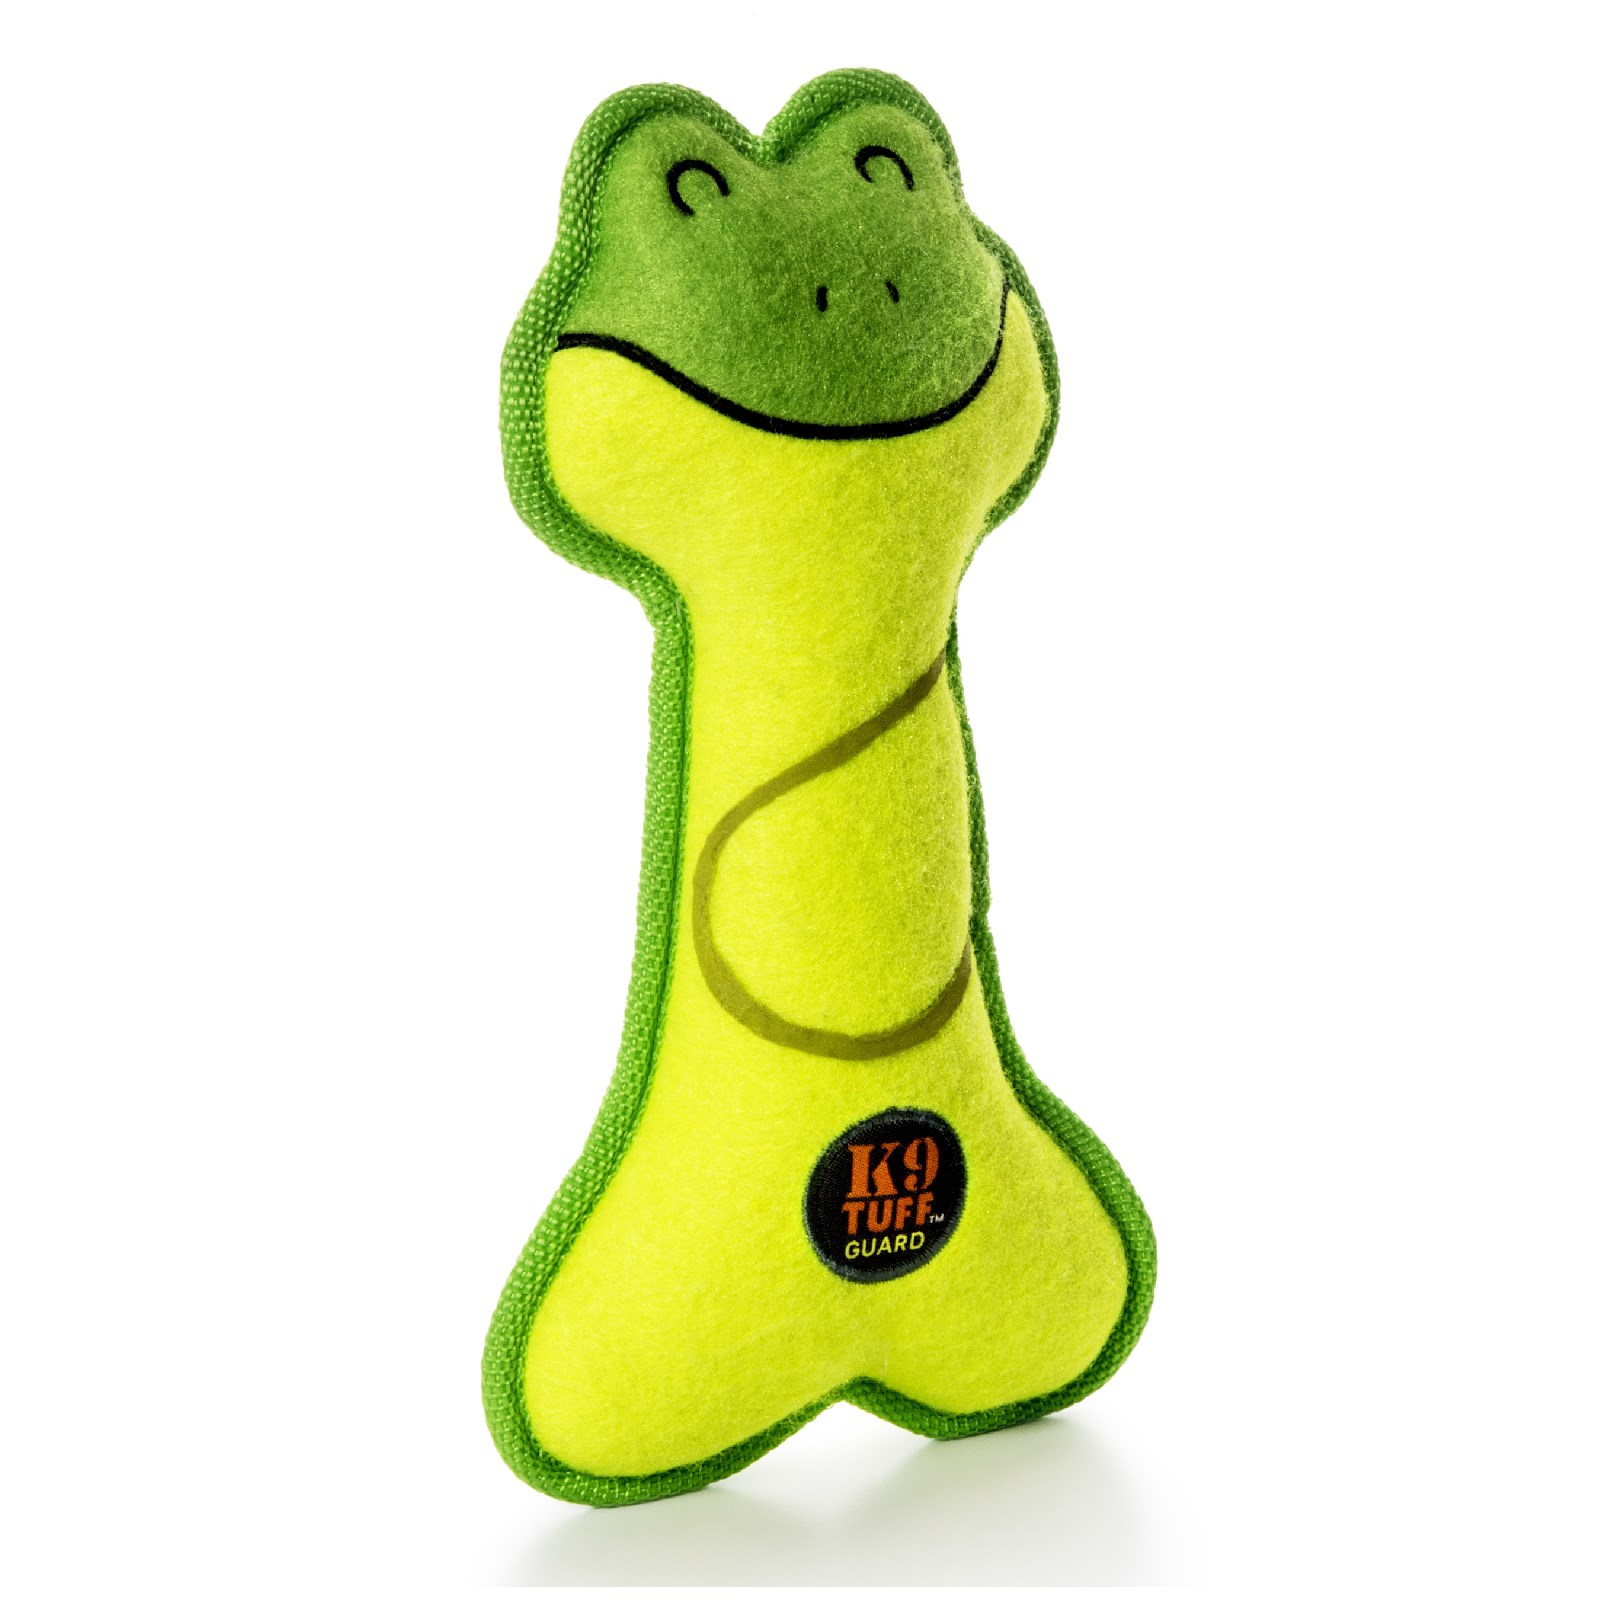 Charming Pet Lil Raquets Tennis Ball Covered Stuffed Dog Toy with K9 Tough Guard - Frog image 0